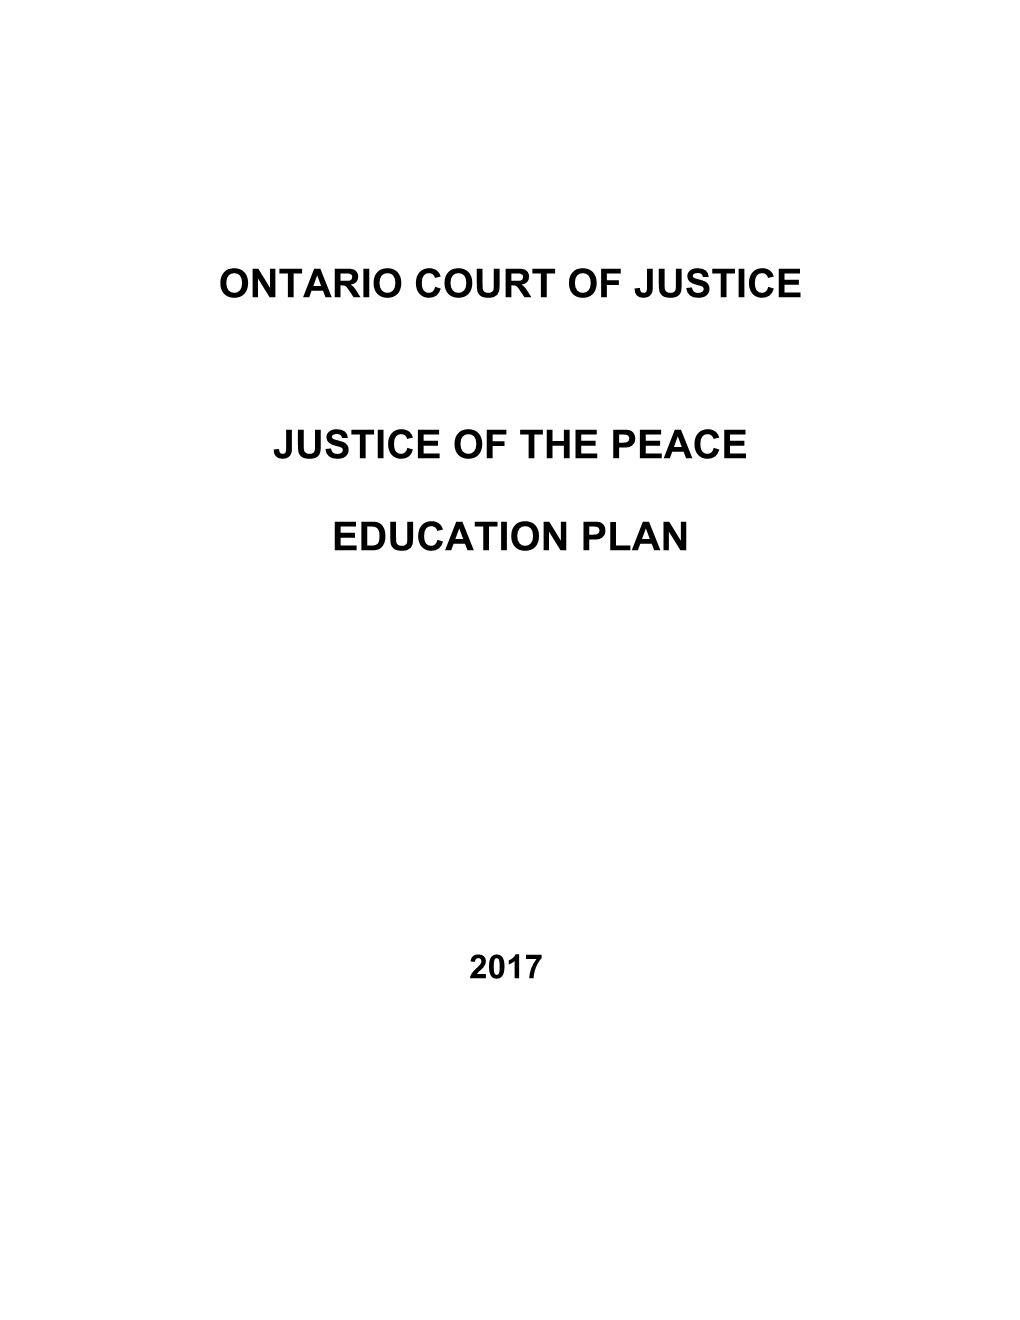 Justice of the Peace Education Plan